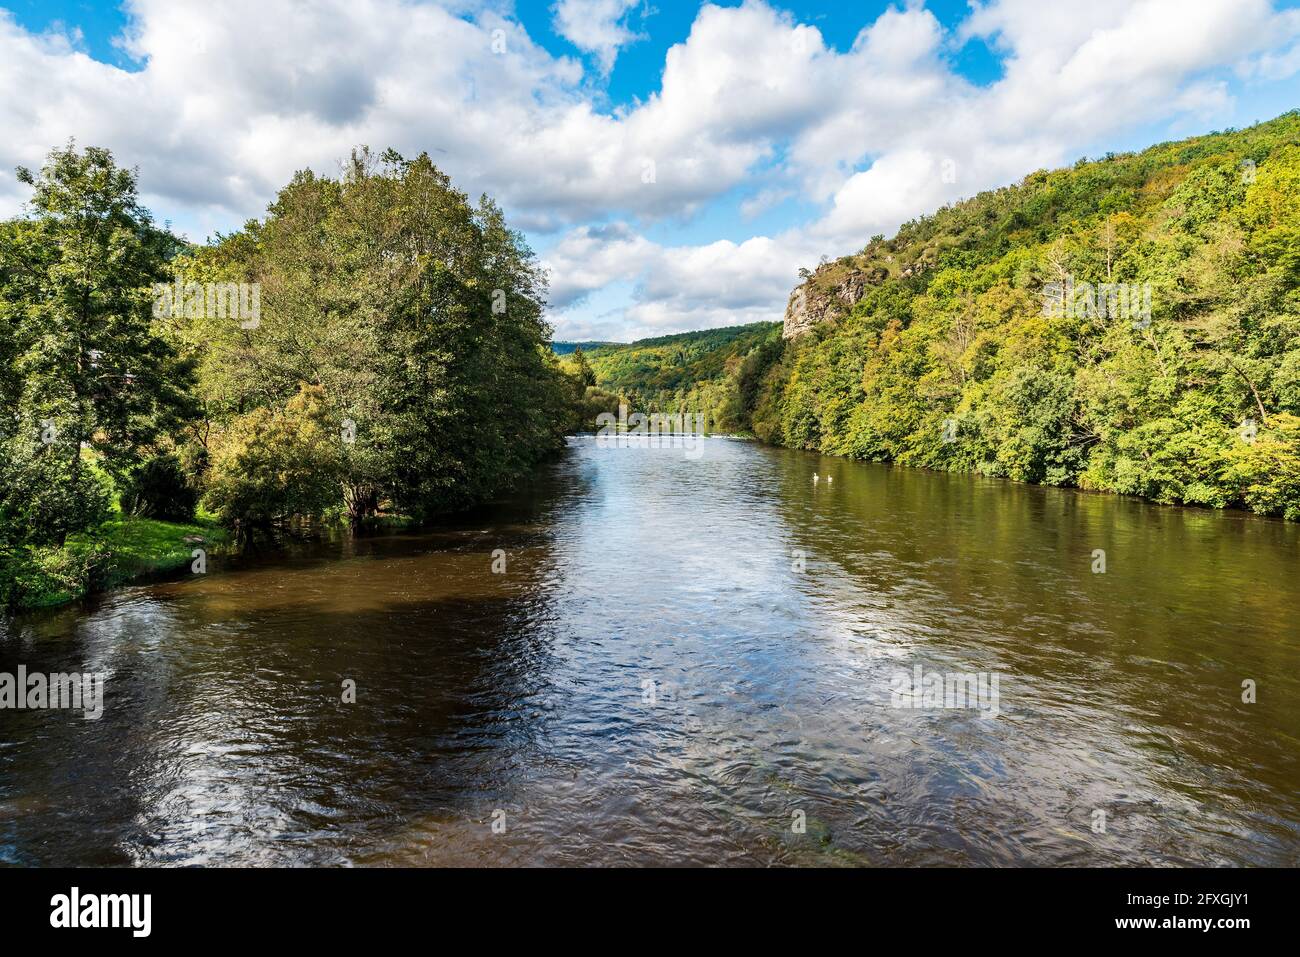 Beautiful Podyji / Thayatal national park on czech - austrian borders from border bridge near Hardegg town with Dyje river and forest covered hill wit Stock Photo